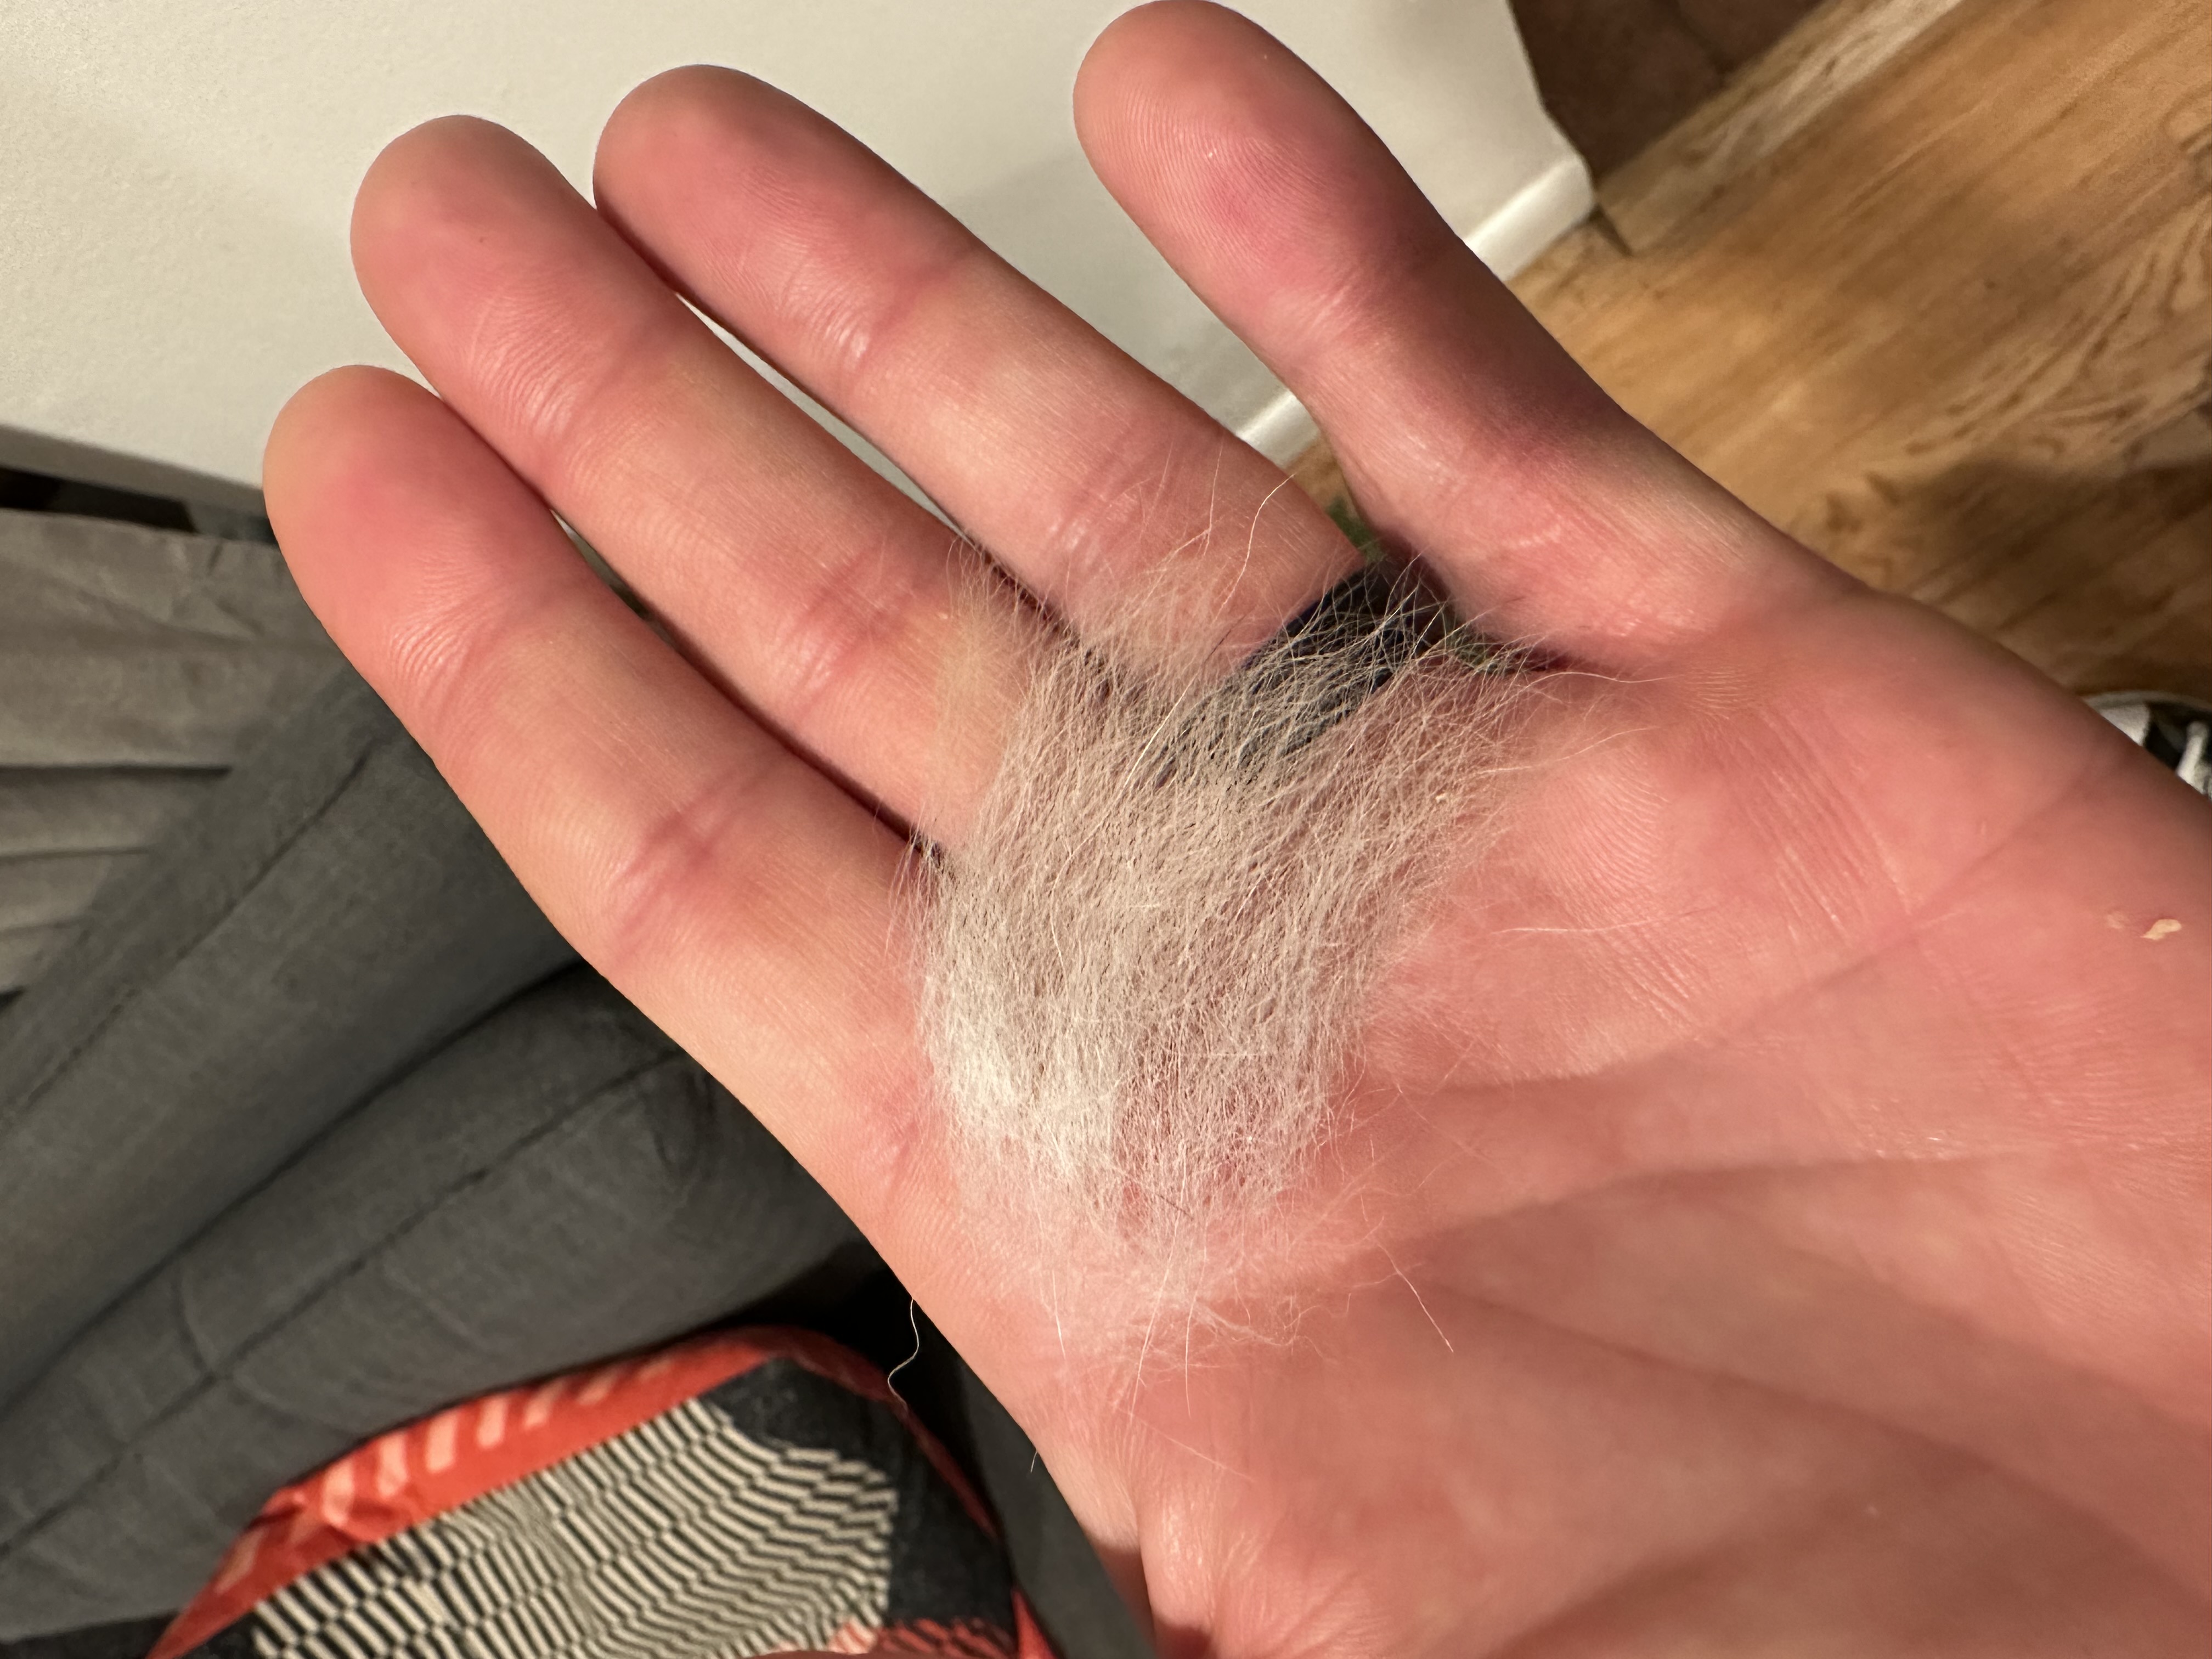 Clumps of dog hair found all over